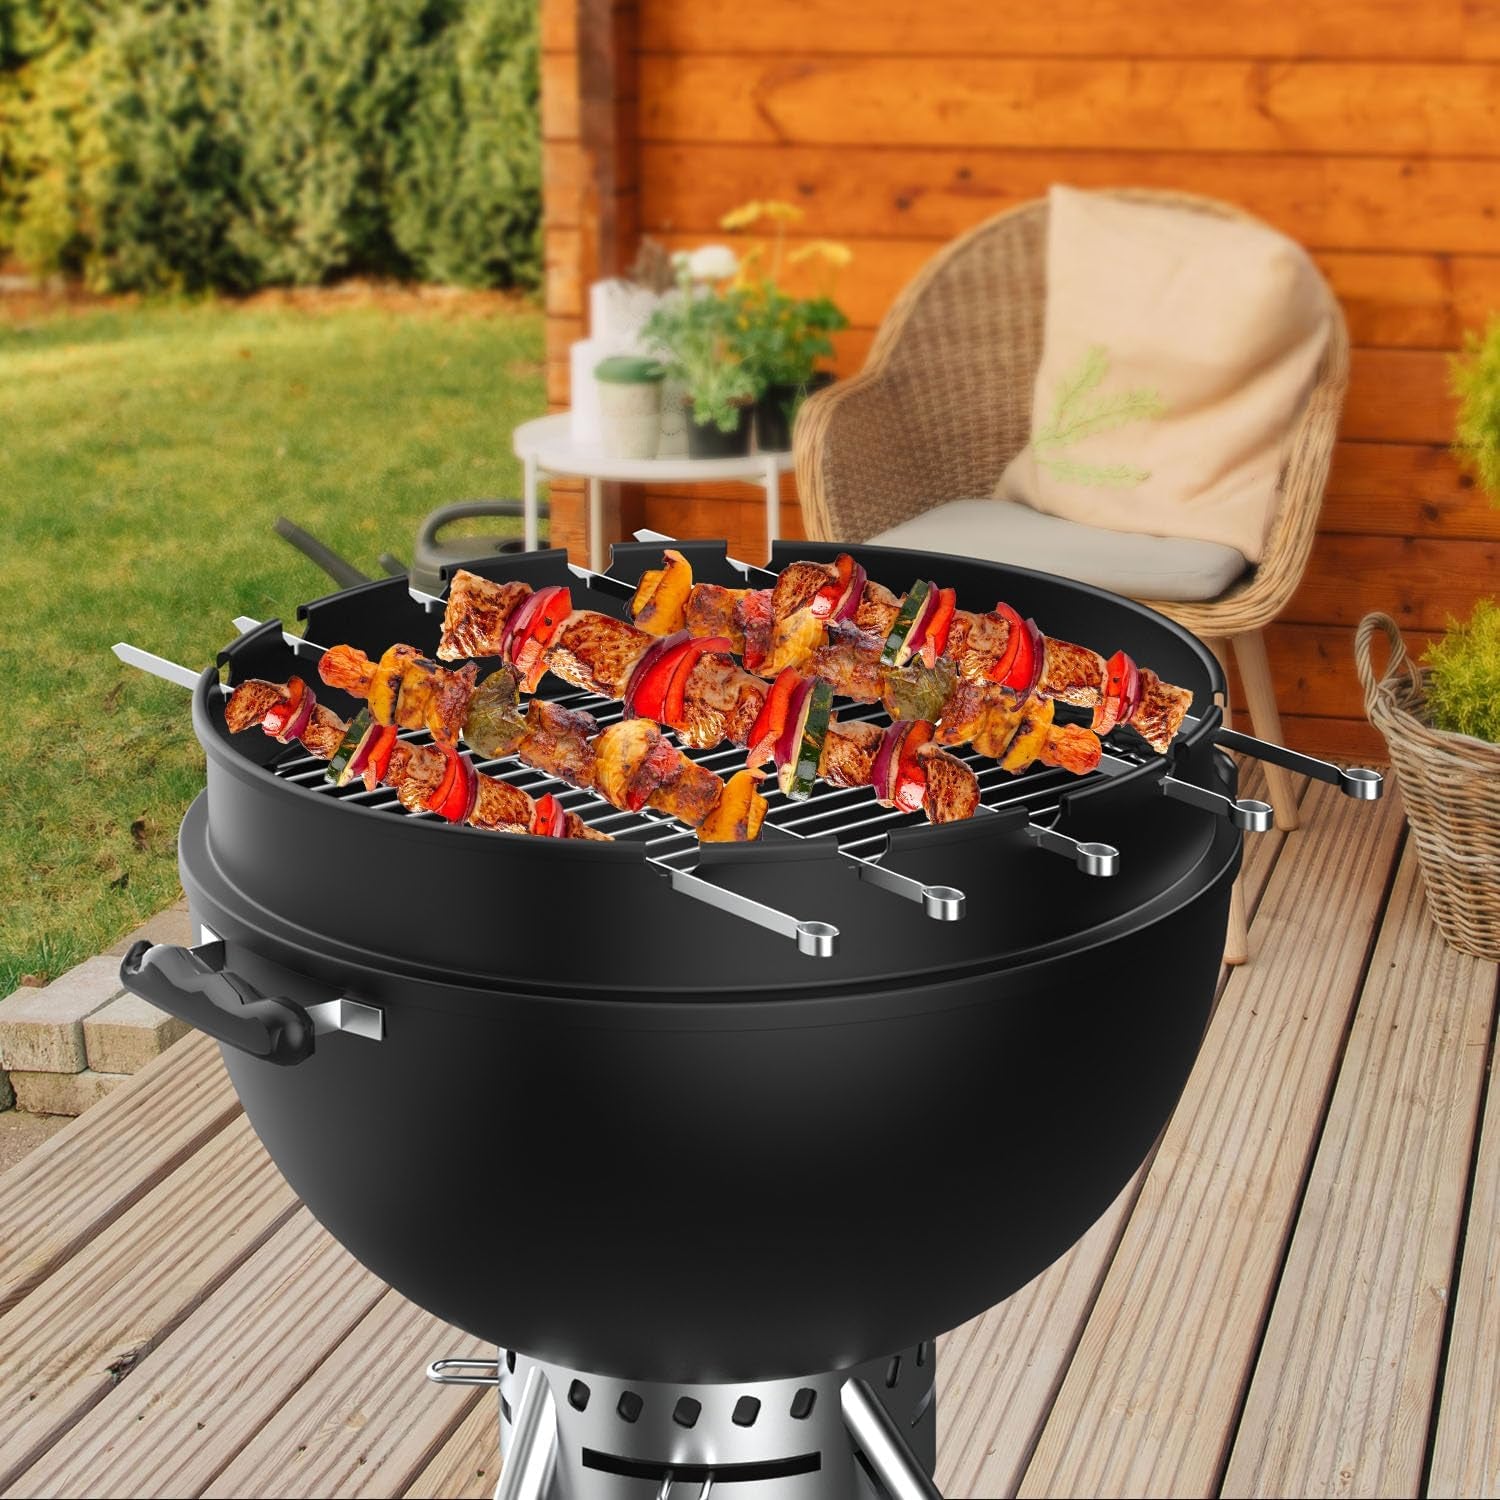 Rotisserie Ring with Kabob Skewer Kits for Weber 18 Inch Charcoal Kettle Grills, Grill Rotisserie for Solo Stove Bonfire and Other Similar Charcoal Grills